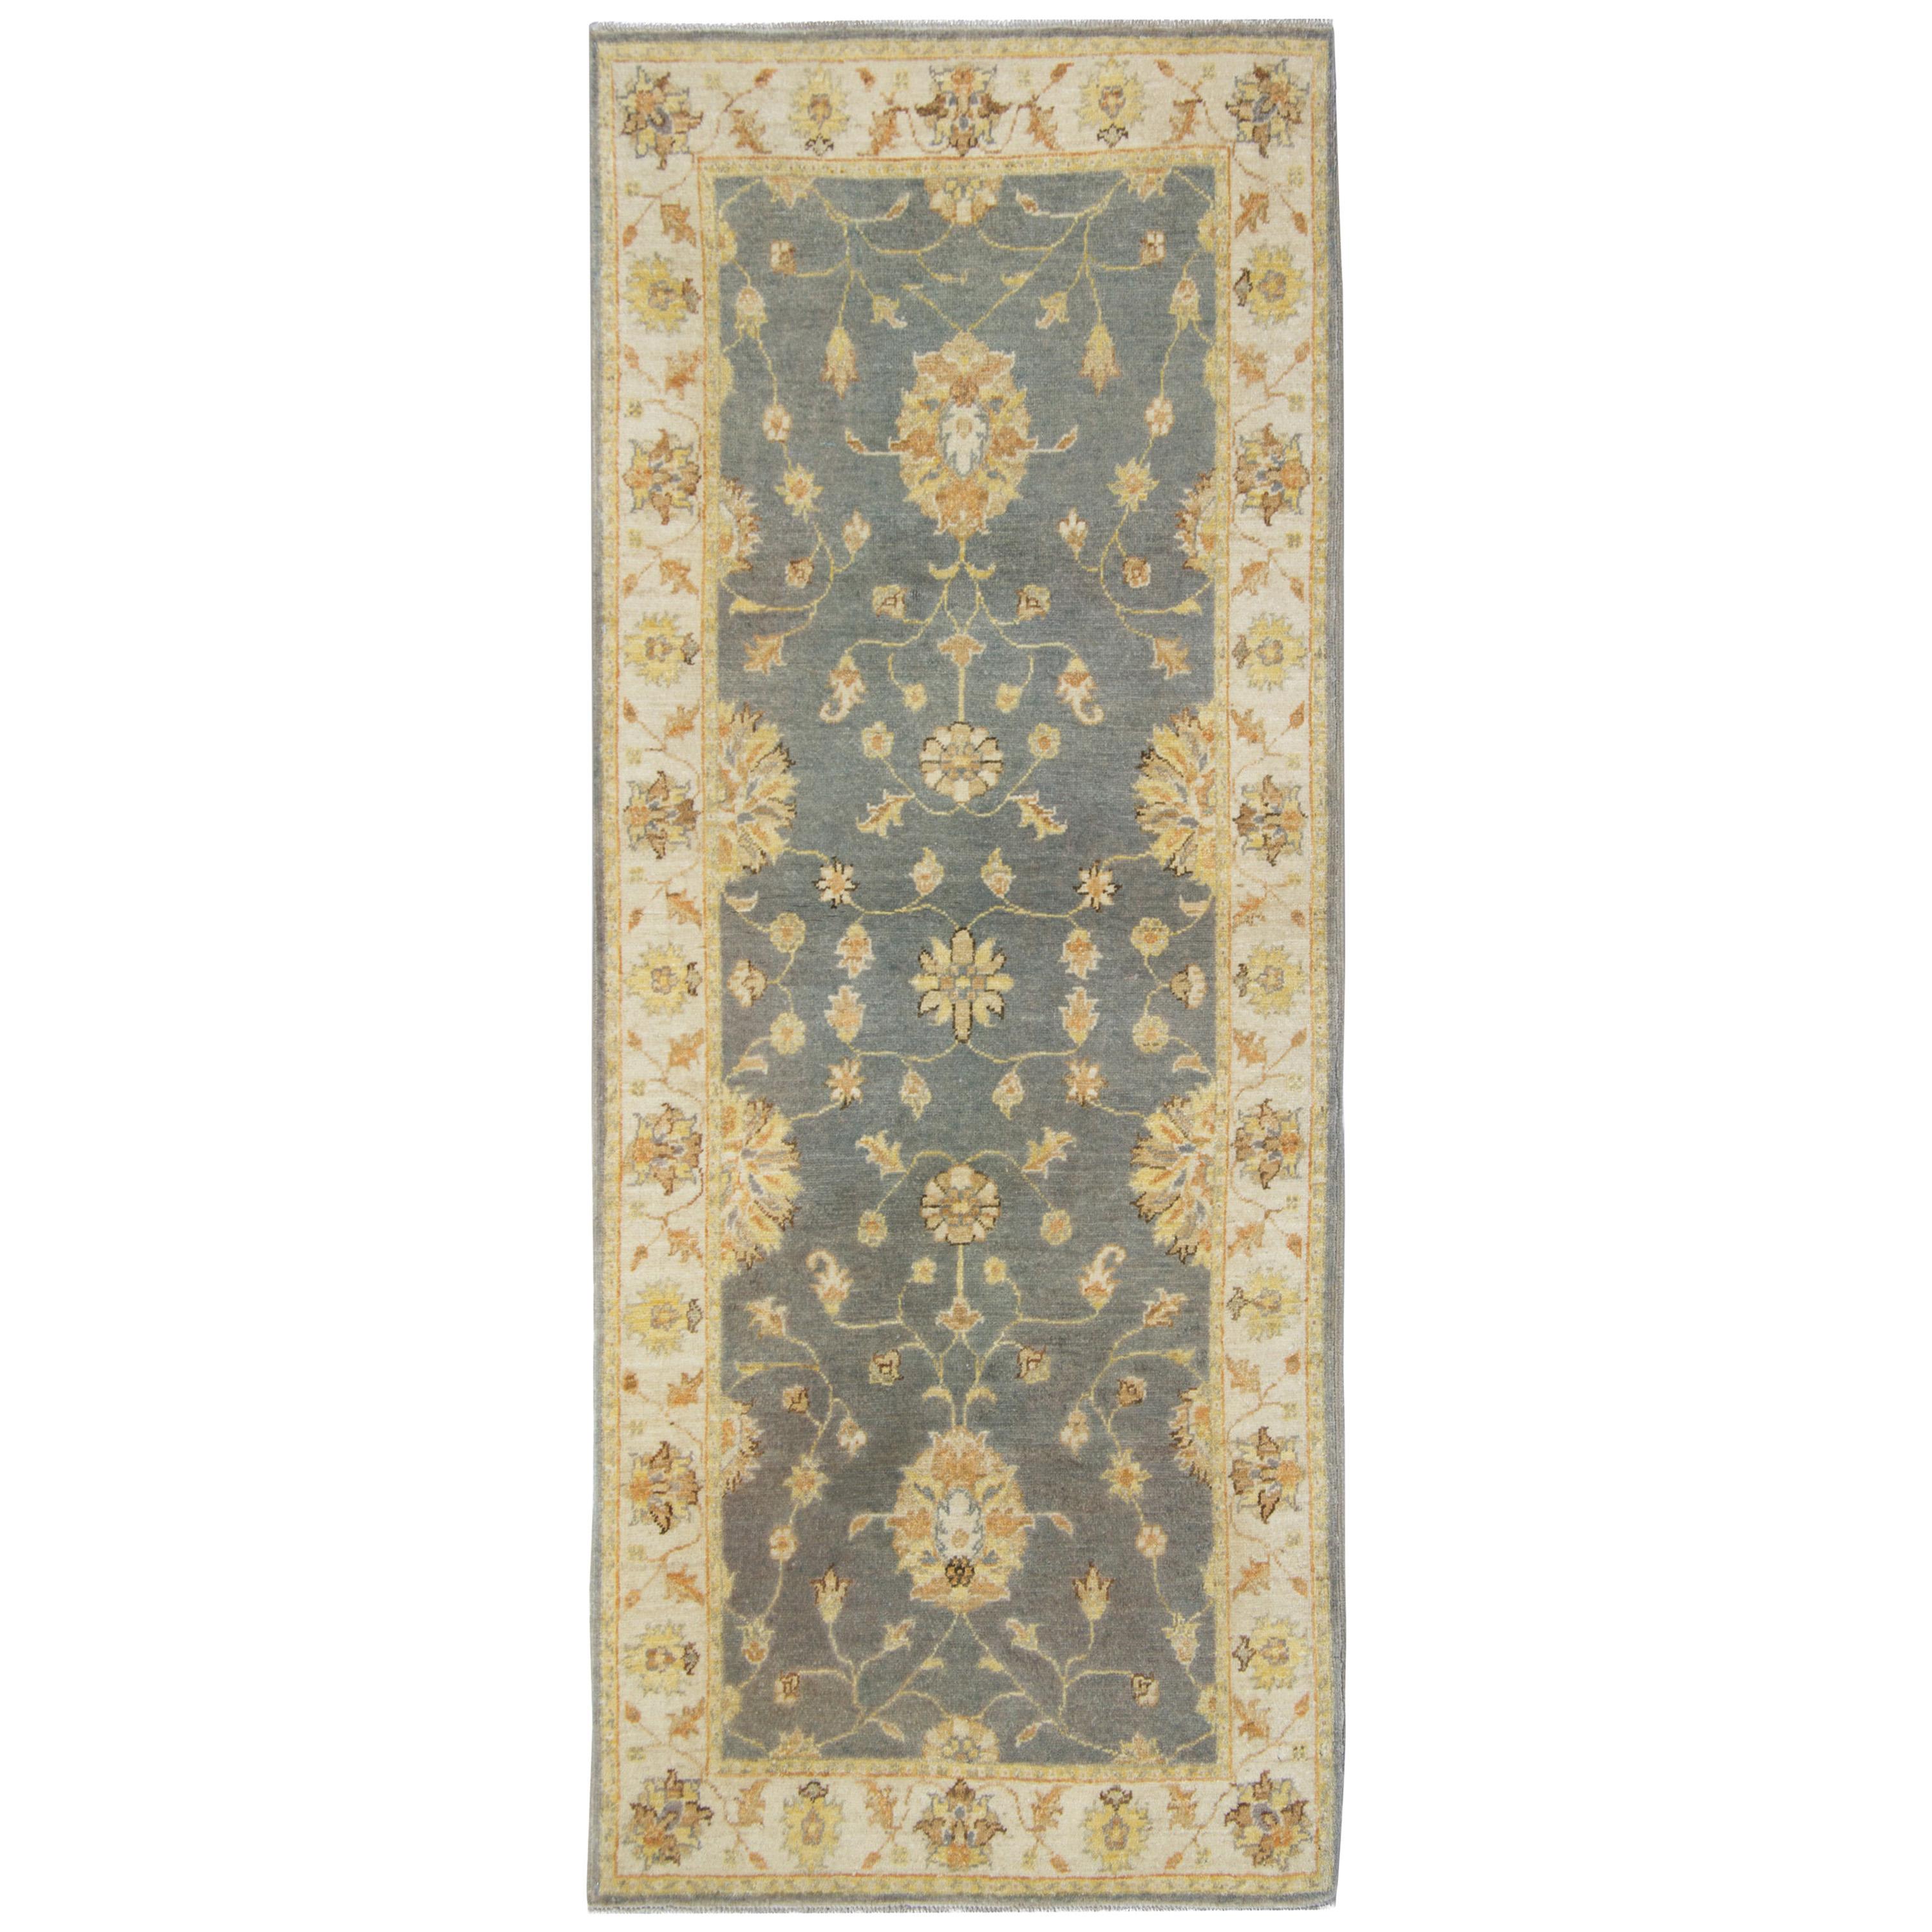 What is a traditional rug?